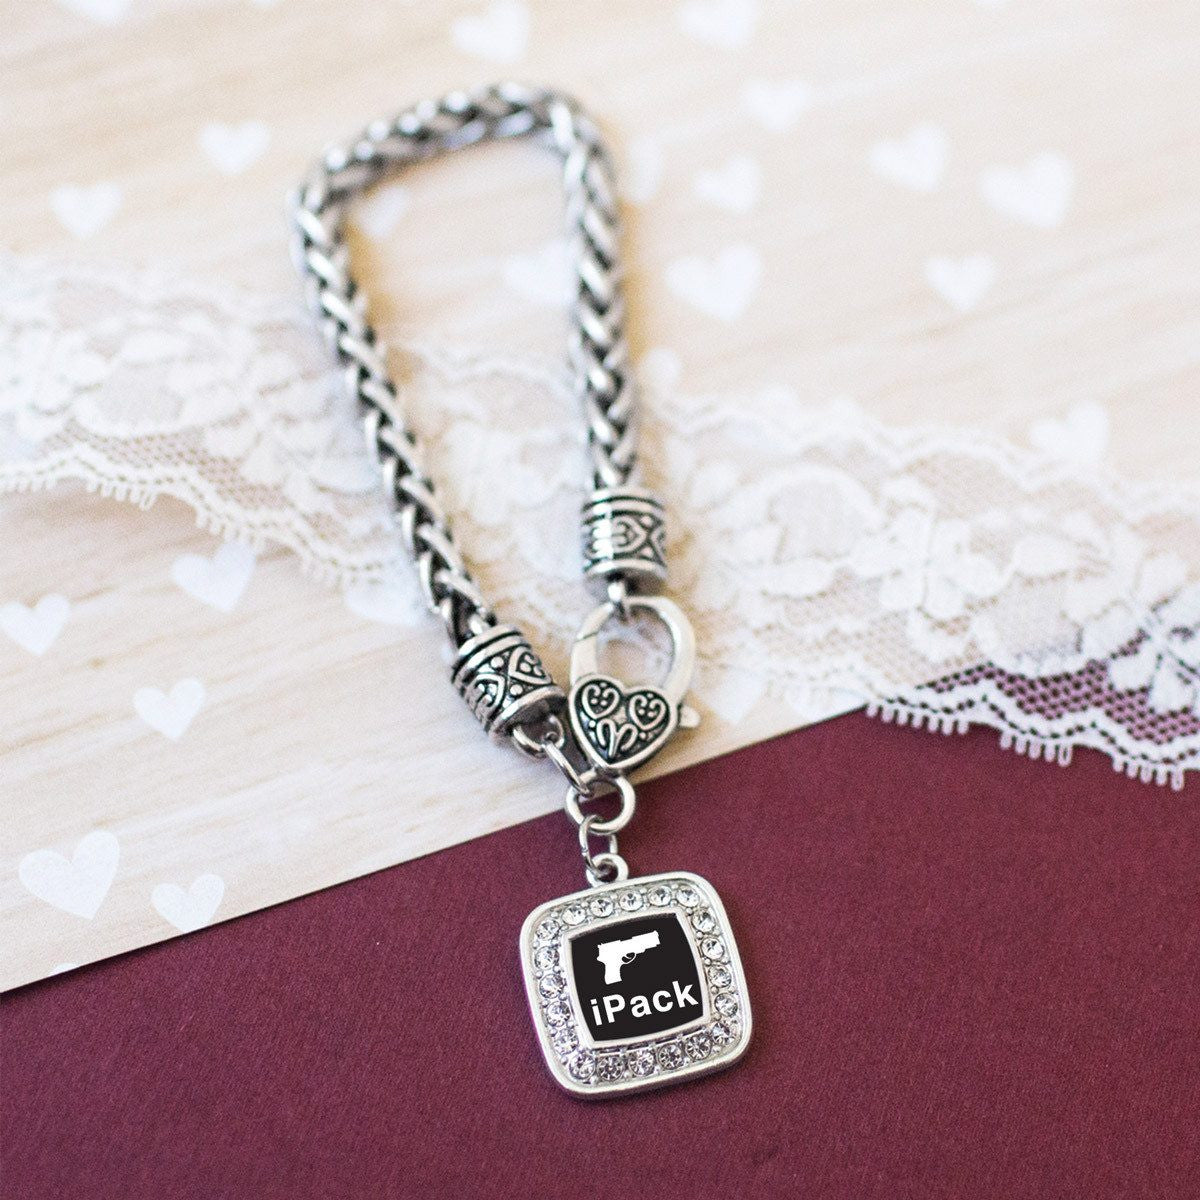 iPack Charm Jewelry Collection